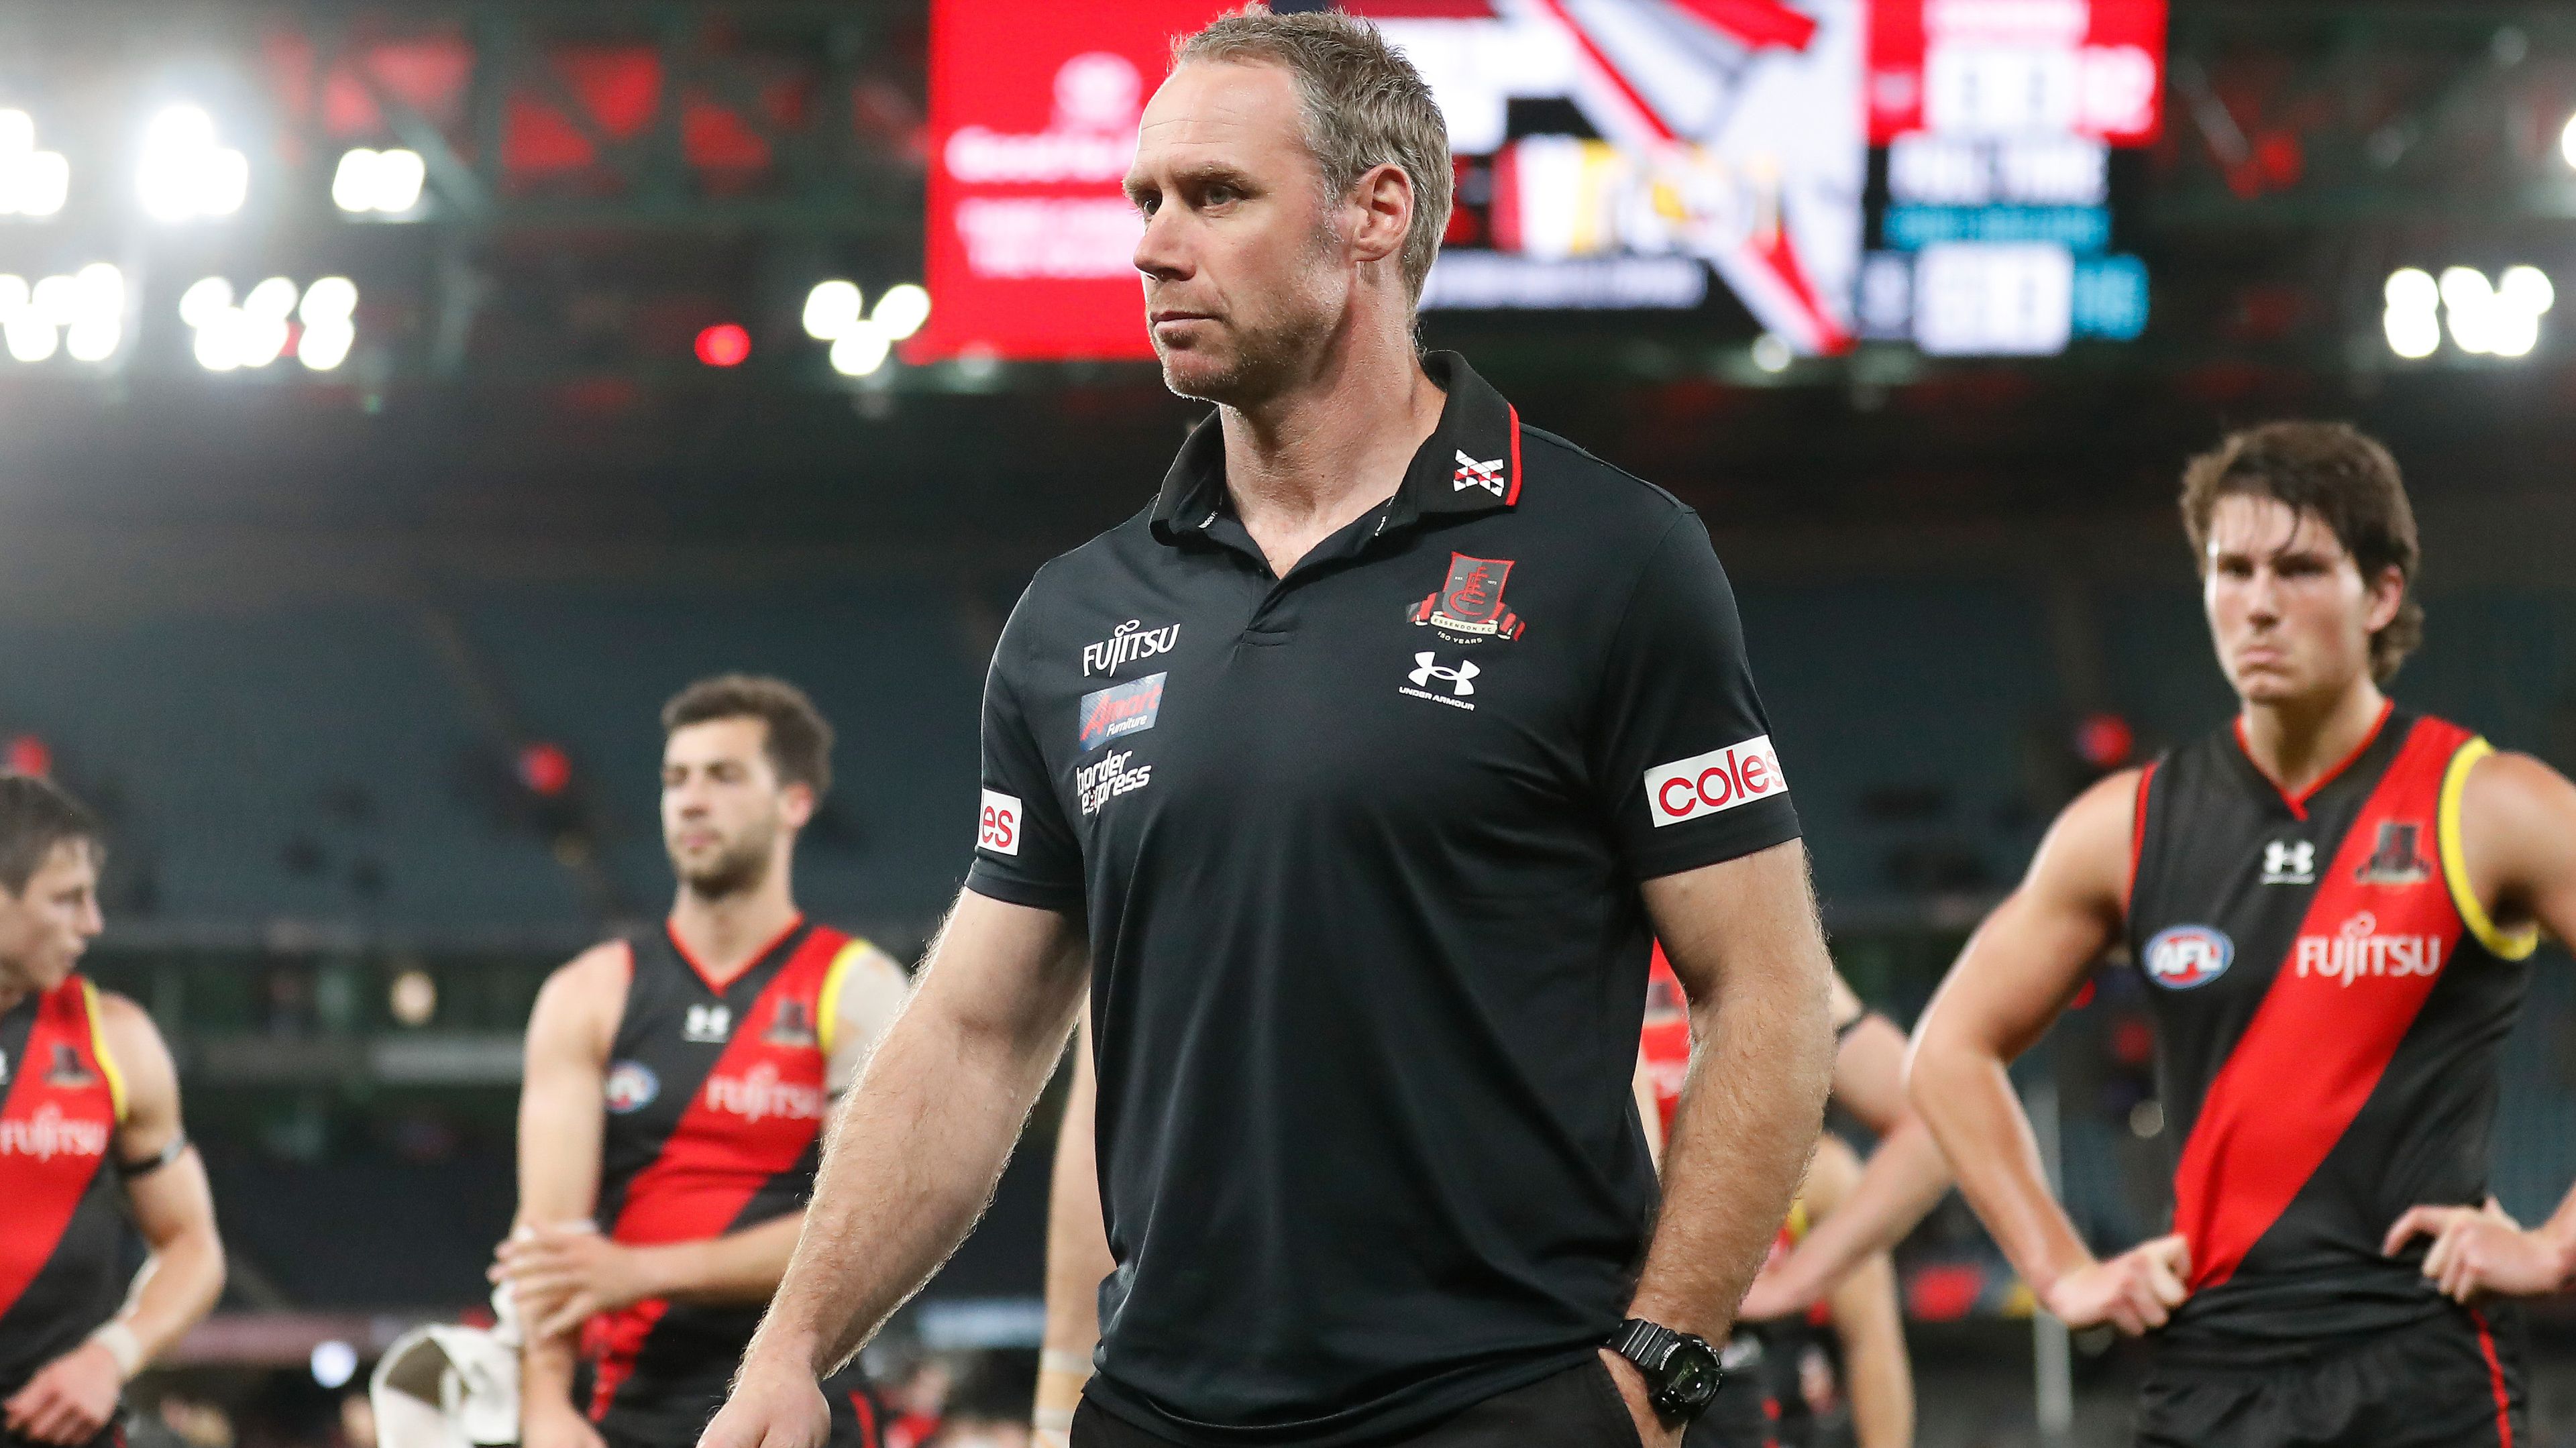  Ben Rutten, Senior Coach of the Bombers looks dejected after a loss during the 2022 AFL Round 22 match between the Essendon Bombers and the Port Adelaide Power at Marvel Stadium on August 14, 2022 in Melbourne, Australia. (Photo by Michael Willson/AFL Photos via Getty Images)